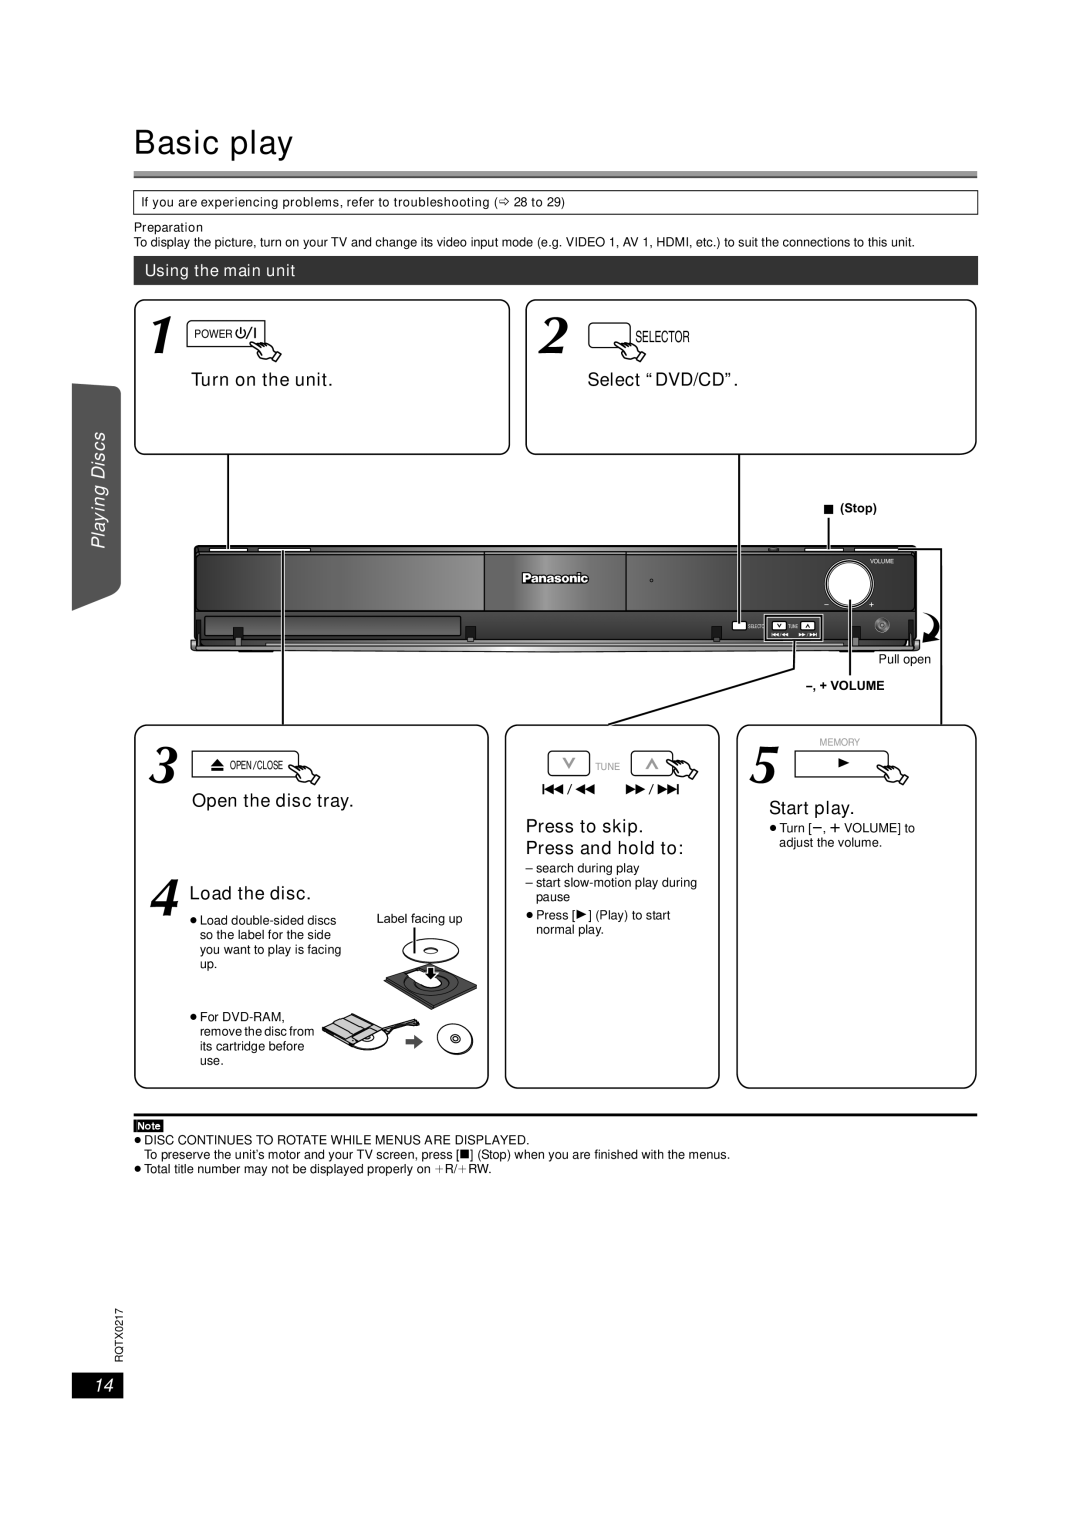 Panasonic SC-PT464 Basic play, Select “DVD/CD”, Playing Discs Other Operations Reference, Open the disc tray, Start play 